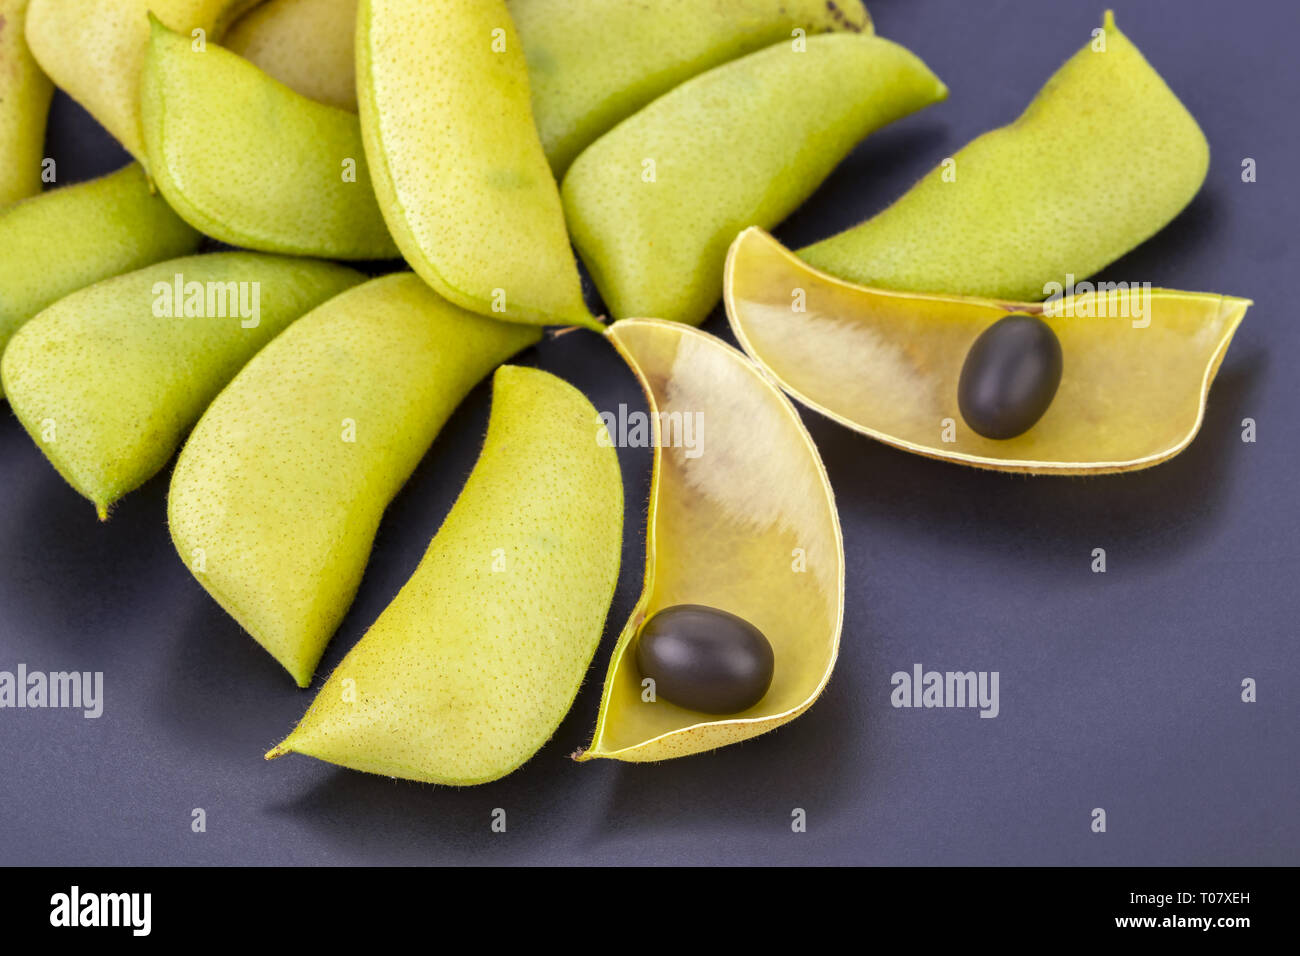 Seed of Cha rueat, Thanao song, Phak puya (scientific name is Caesalpinia mimosoides Lamk.) on black plate Stock Photo